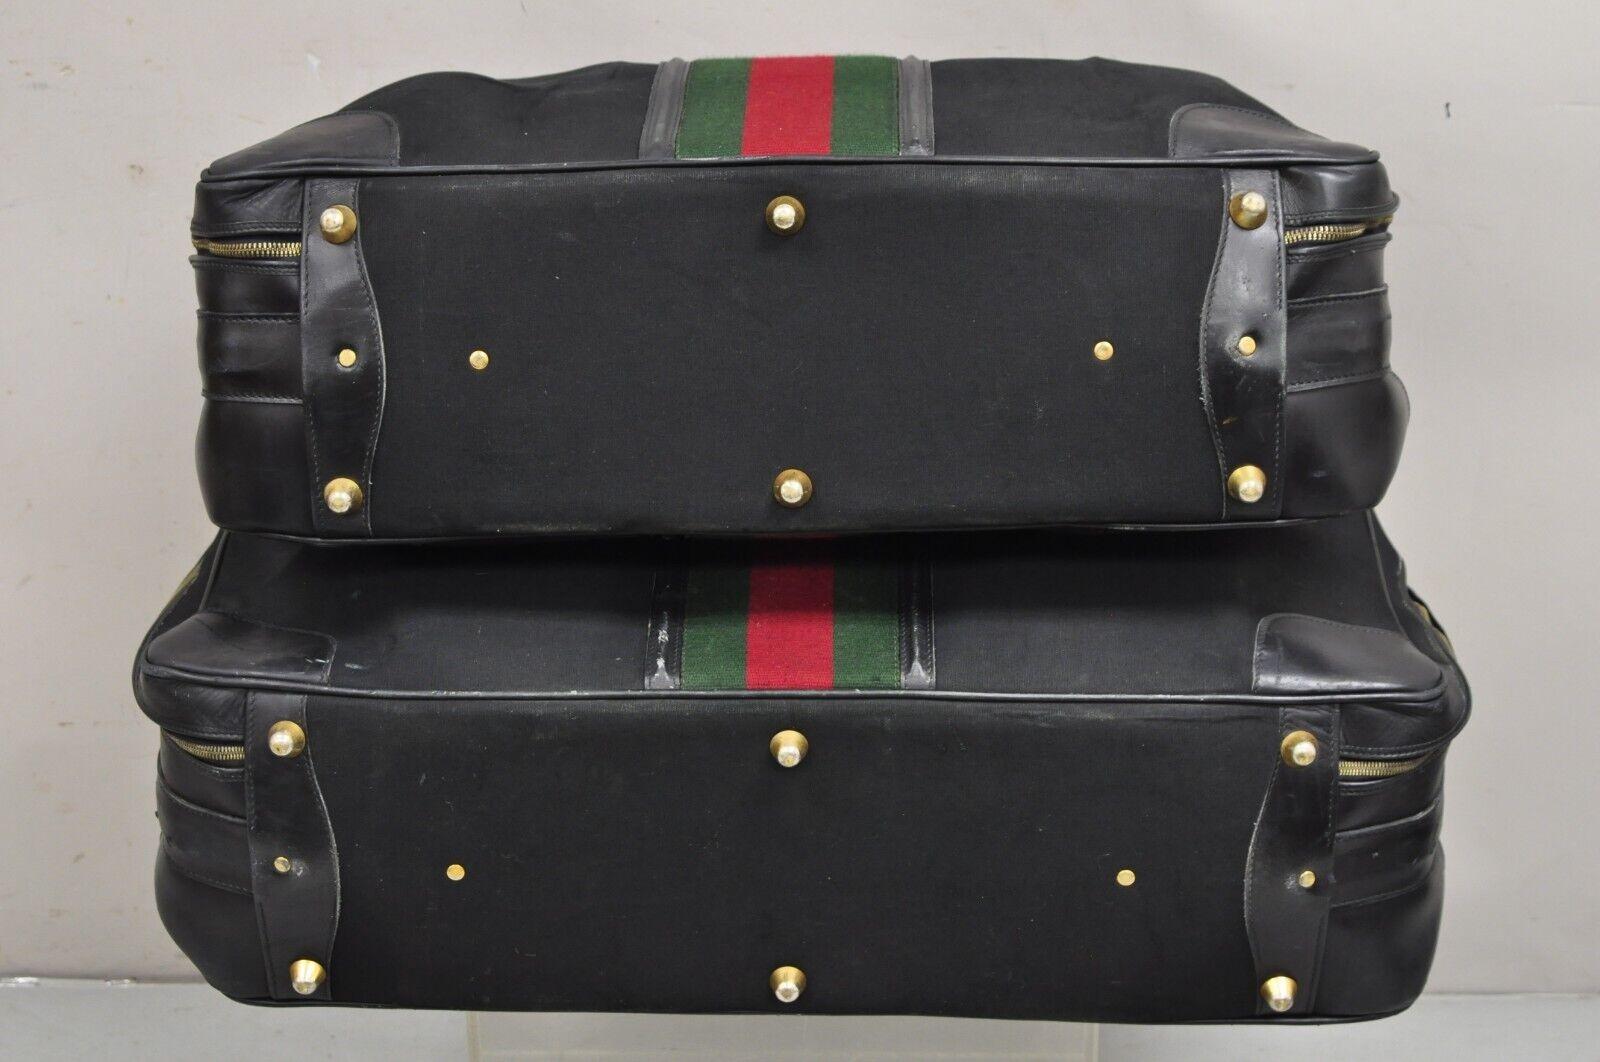 Vintage Gucci Black Canvas and Leather Suitcase Luggage His and Hers Set - 2 Pcs For Sale 5